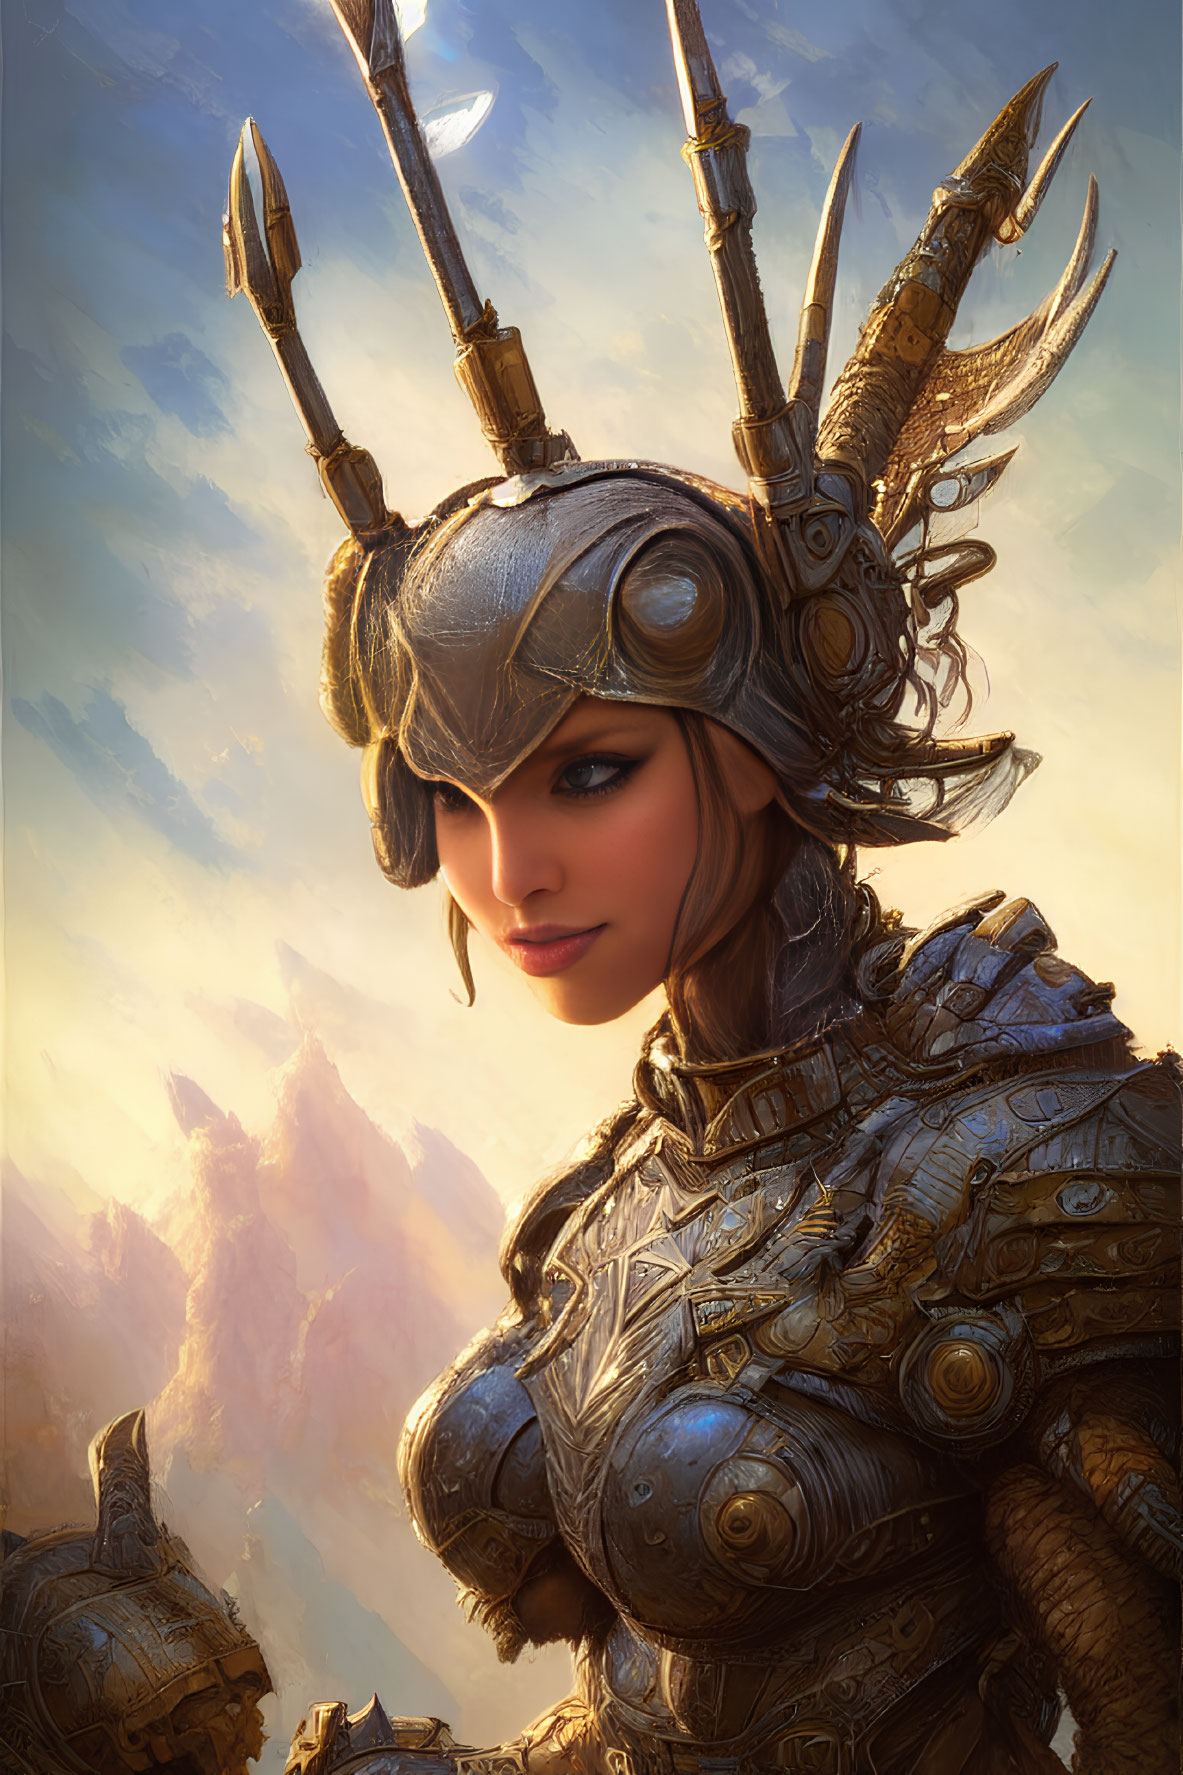 Ornate warrior in helmet and armor against golden clouds